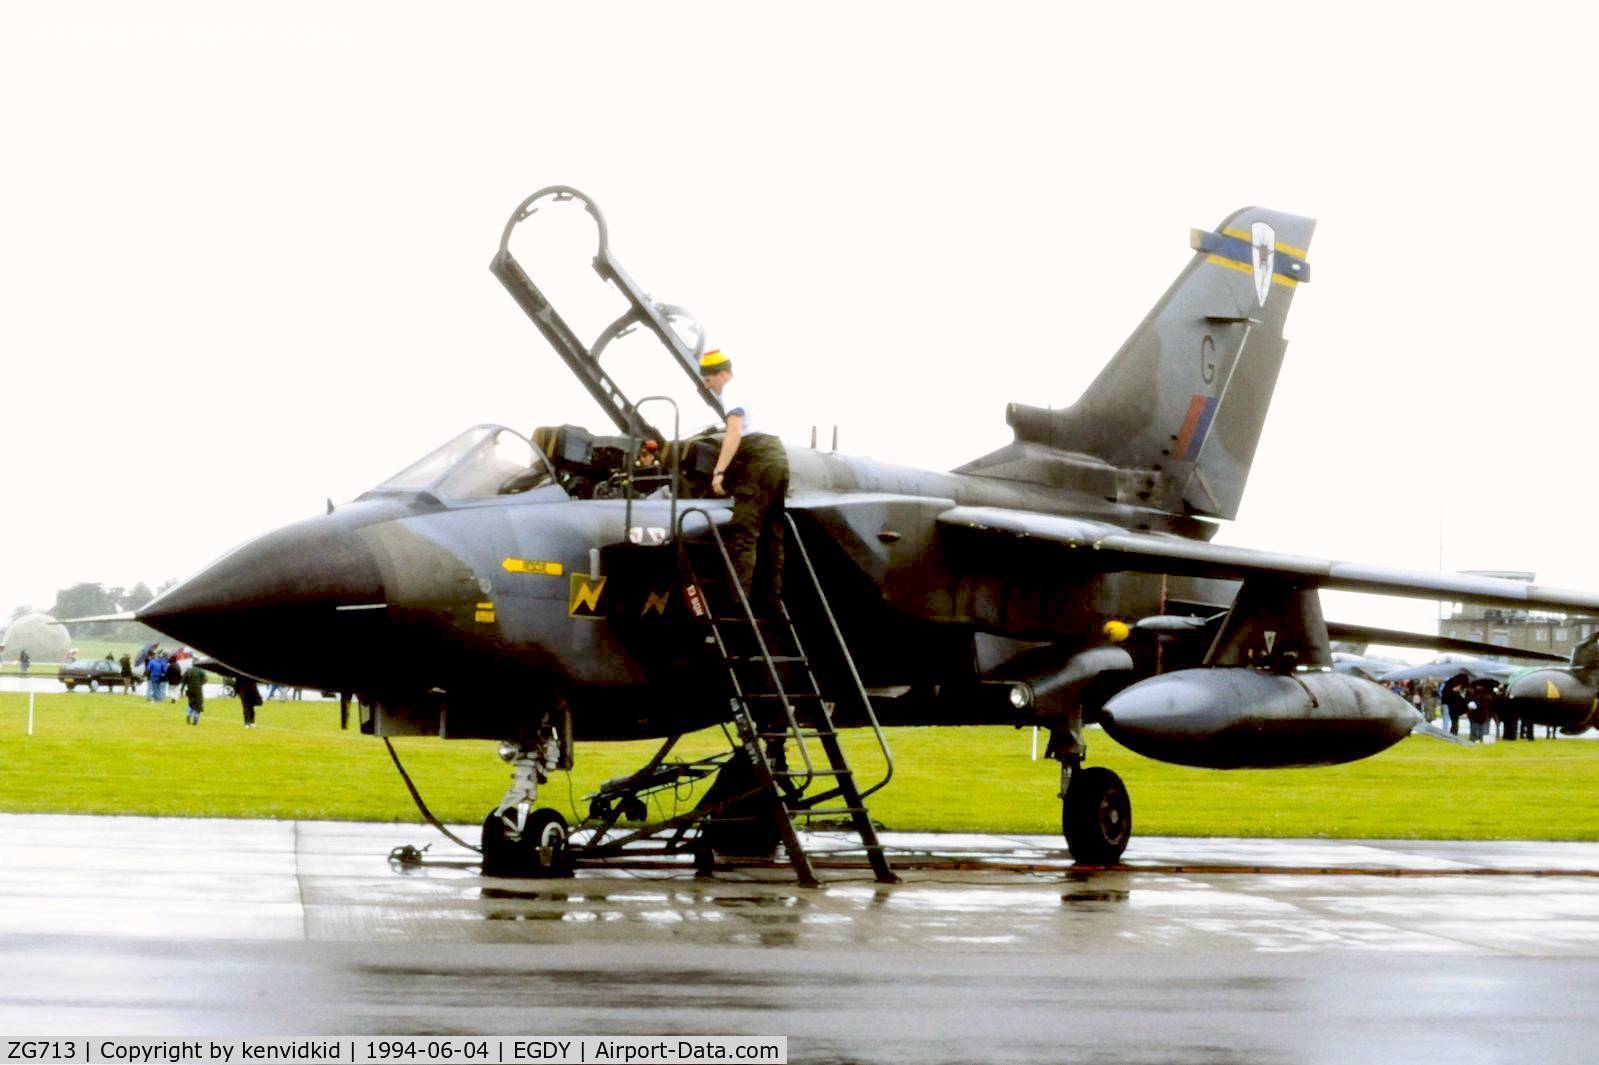 ZG713, 1990 Panavia Tornado GR.1A C/N 824/BS180/3396, On static display at the RNAS Yeovilton 1994 50th Anniversary of D Day photocall. It rained all day.